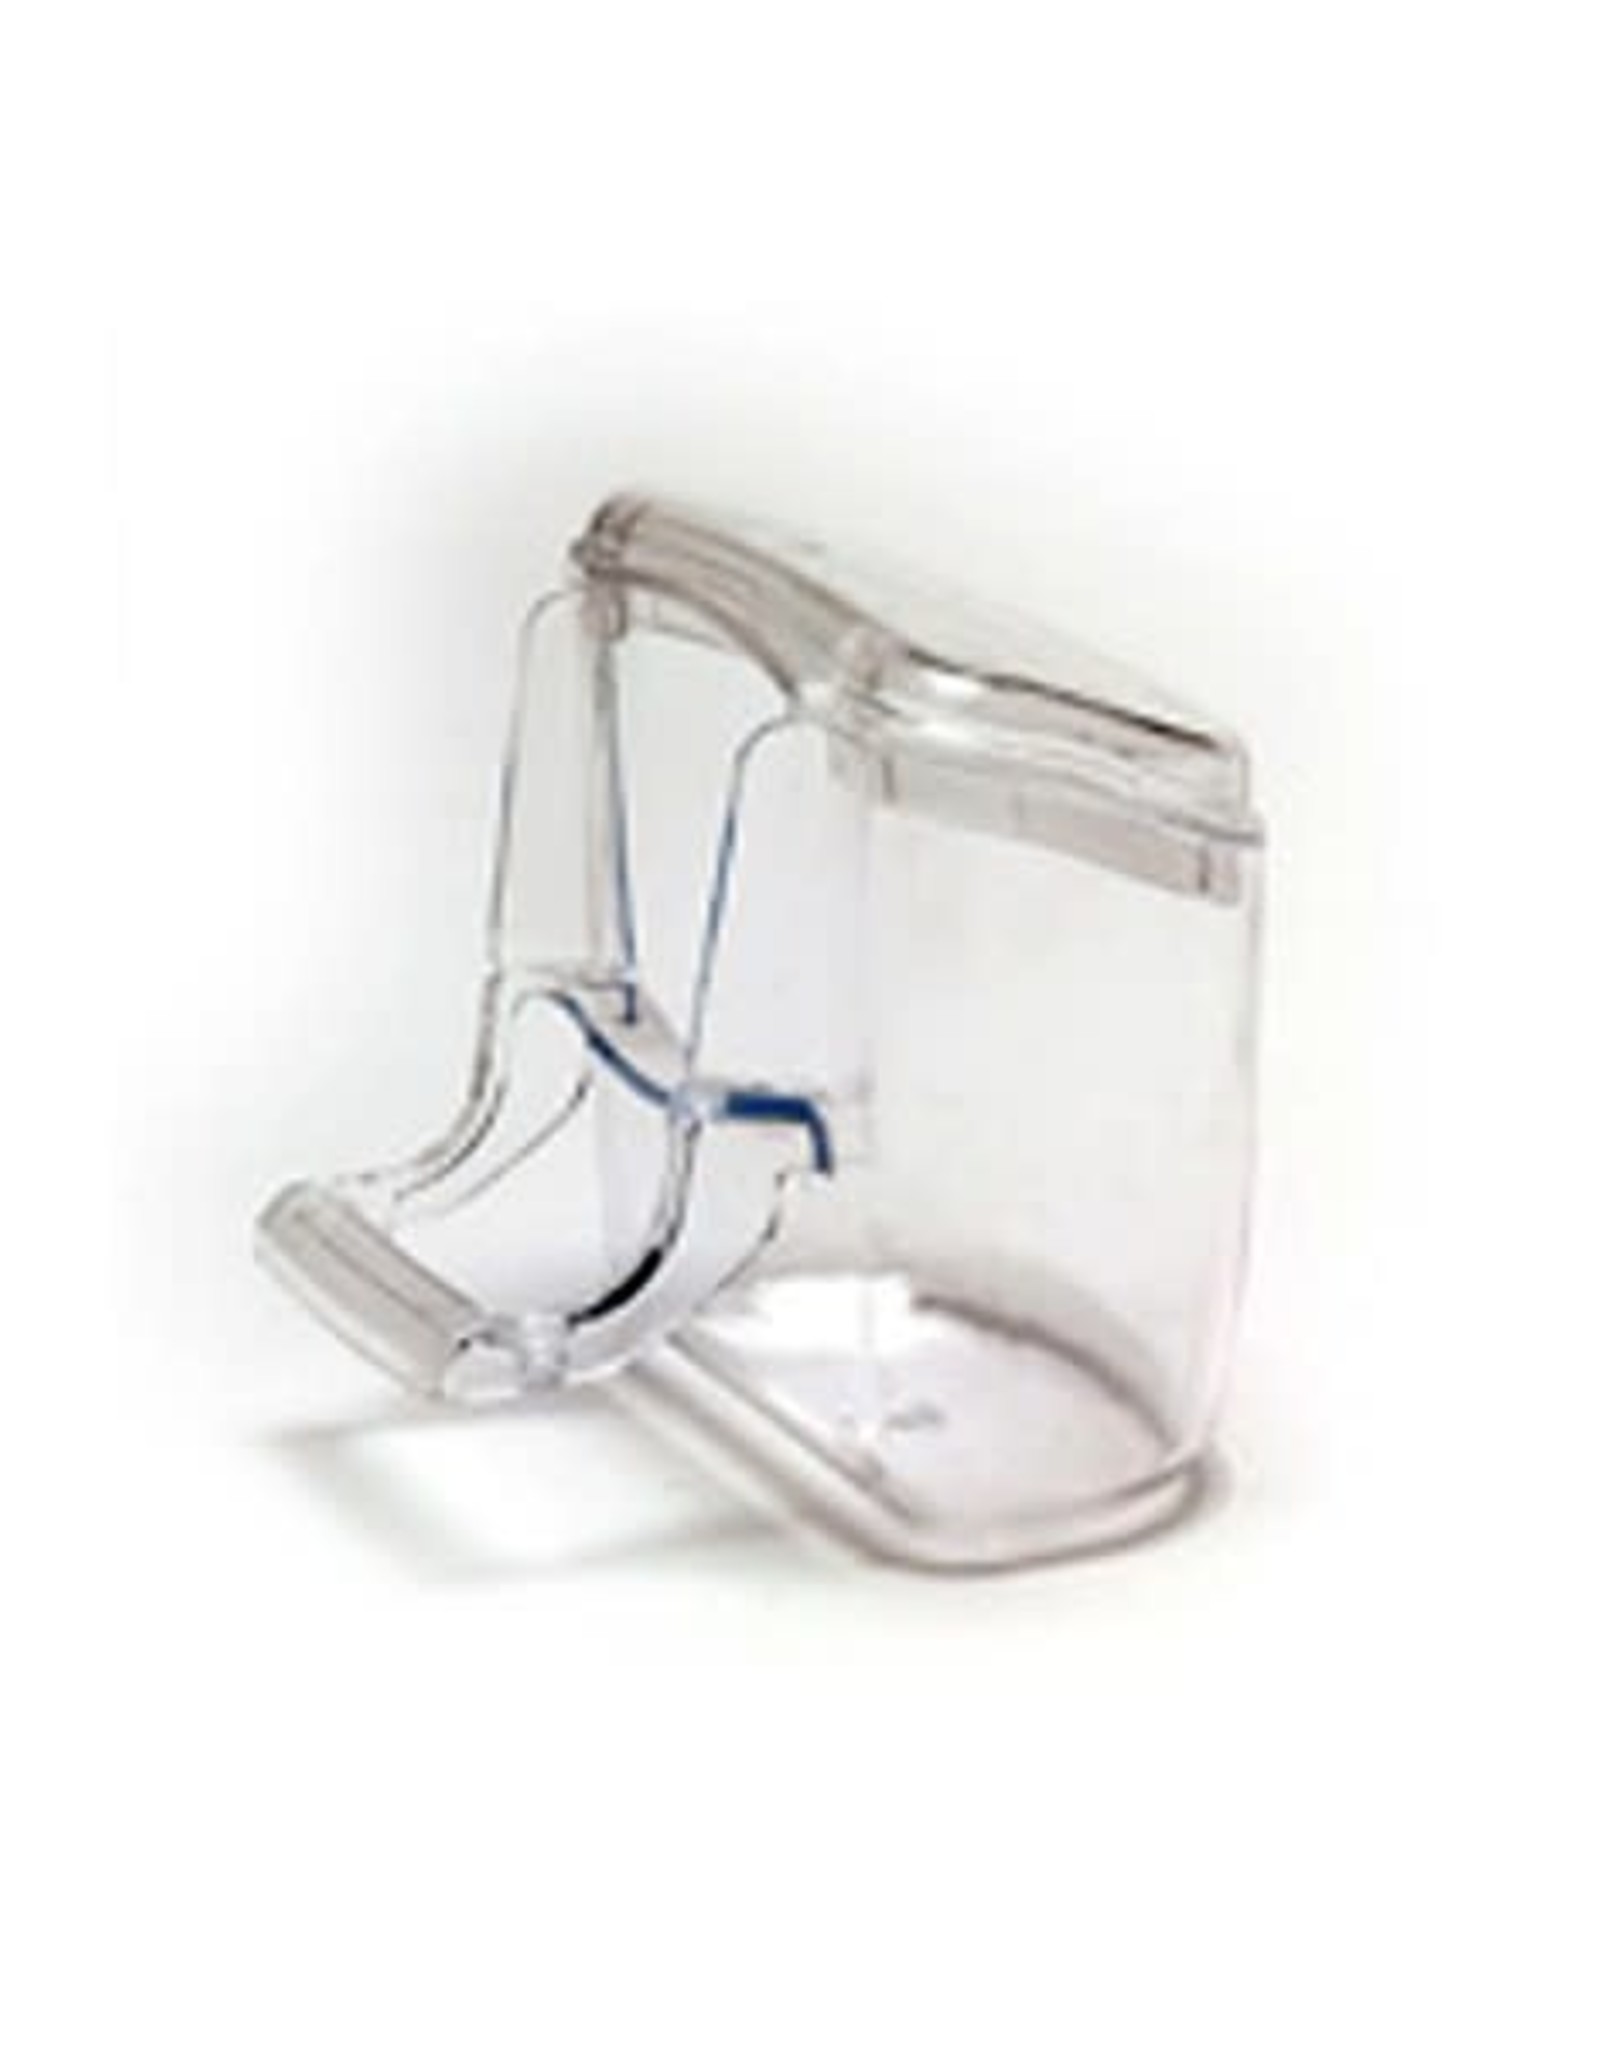 S.T.A.- CANARY FOOD/WATER DISH- 3X3X1.5- NEW STYLE- CLEAR